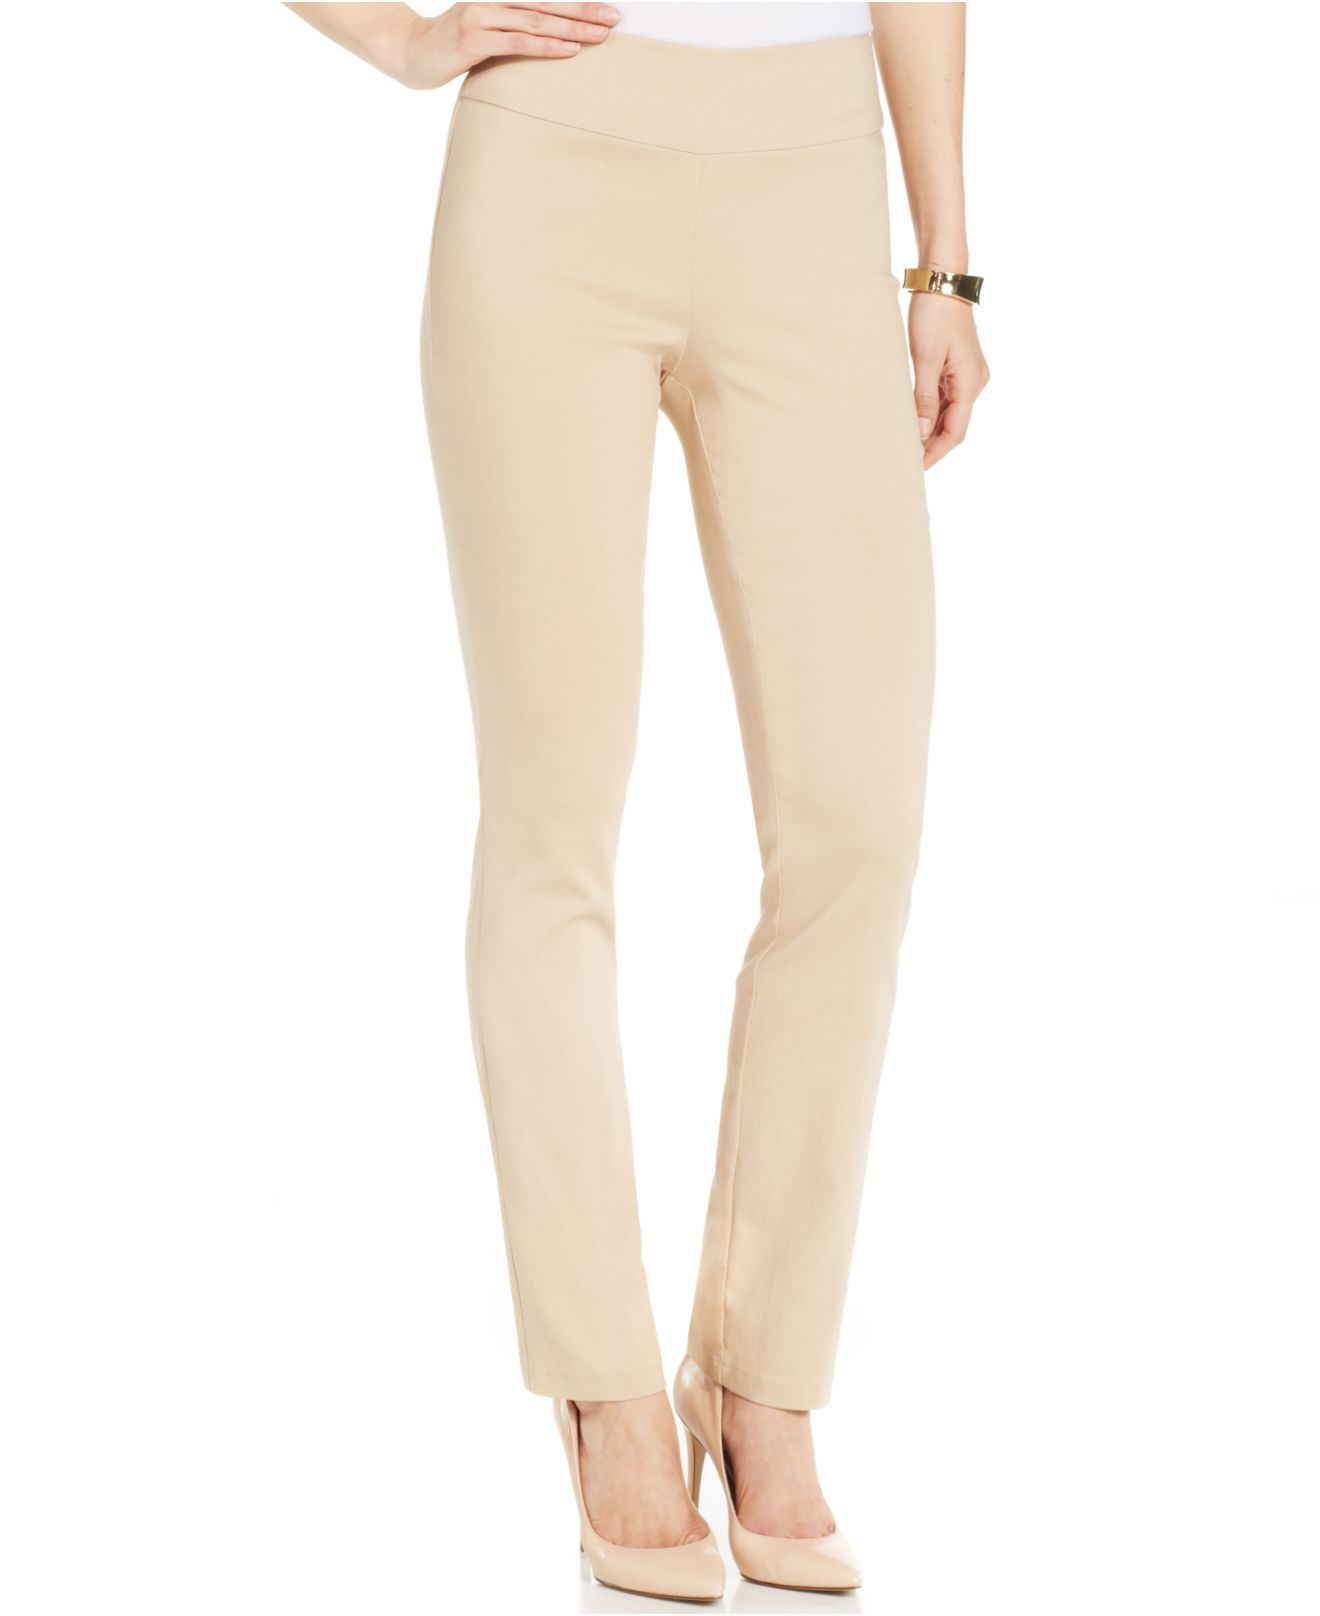 Lyst - Miraclesuit Shaping Straight-Leg Pull-On Pants in Natural